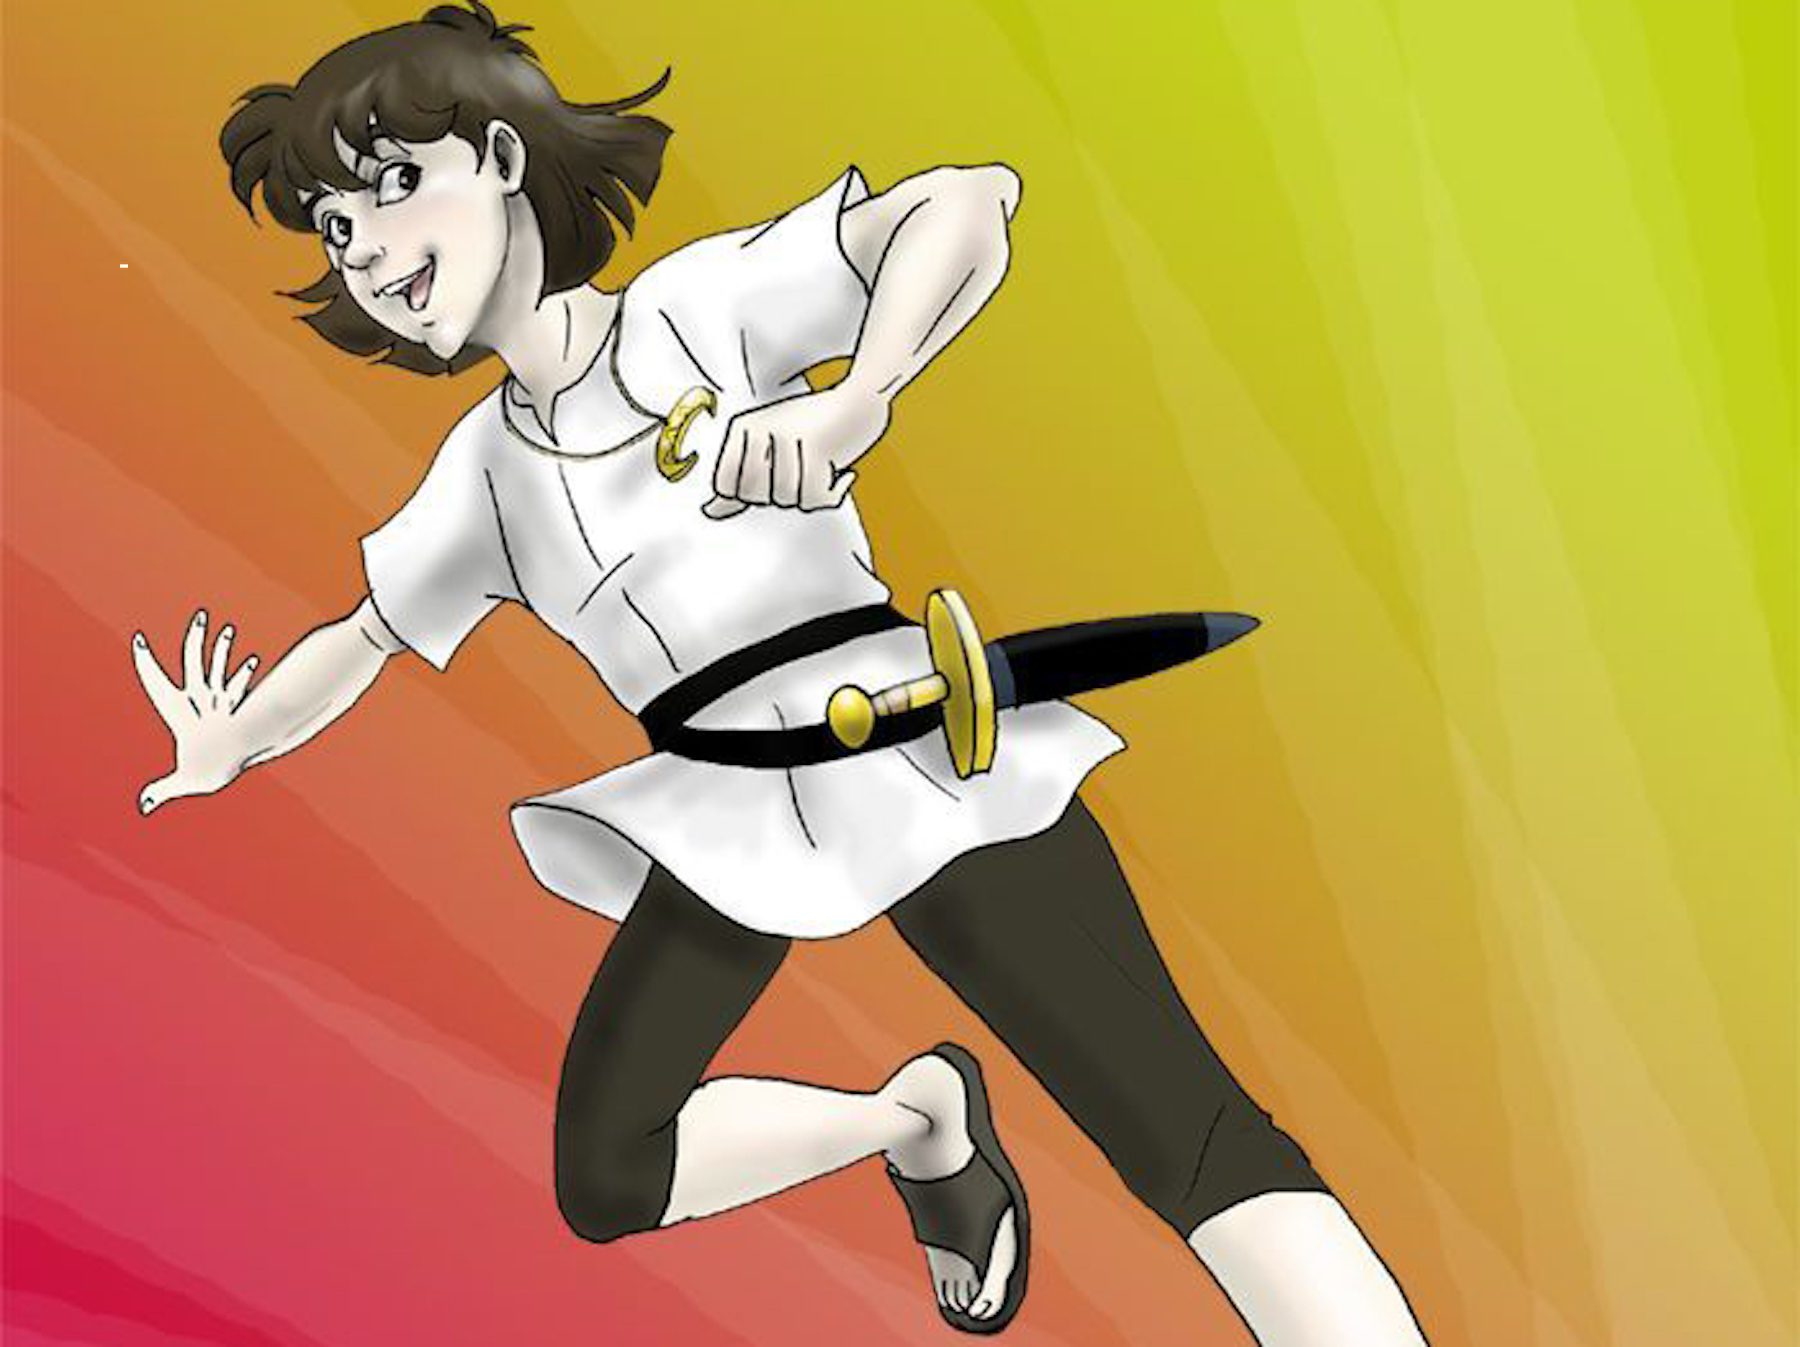 Esteban from Mysterious Cities of Gold, looking down and smiling while running. 